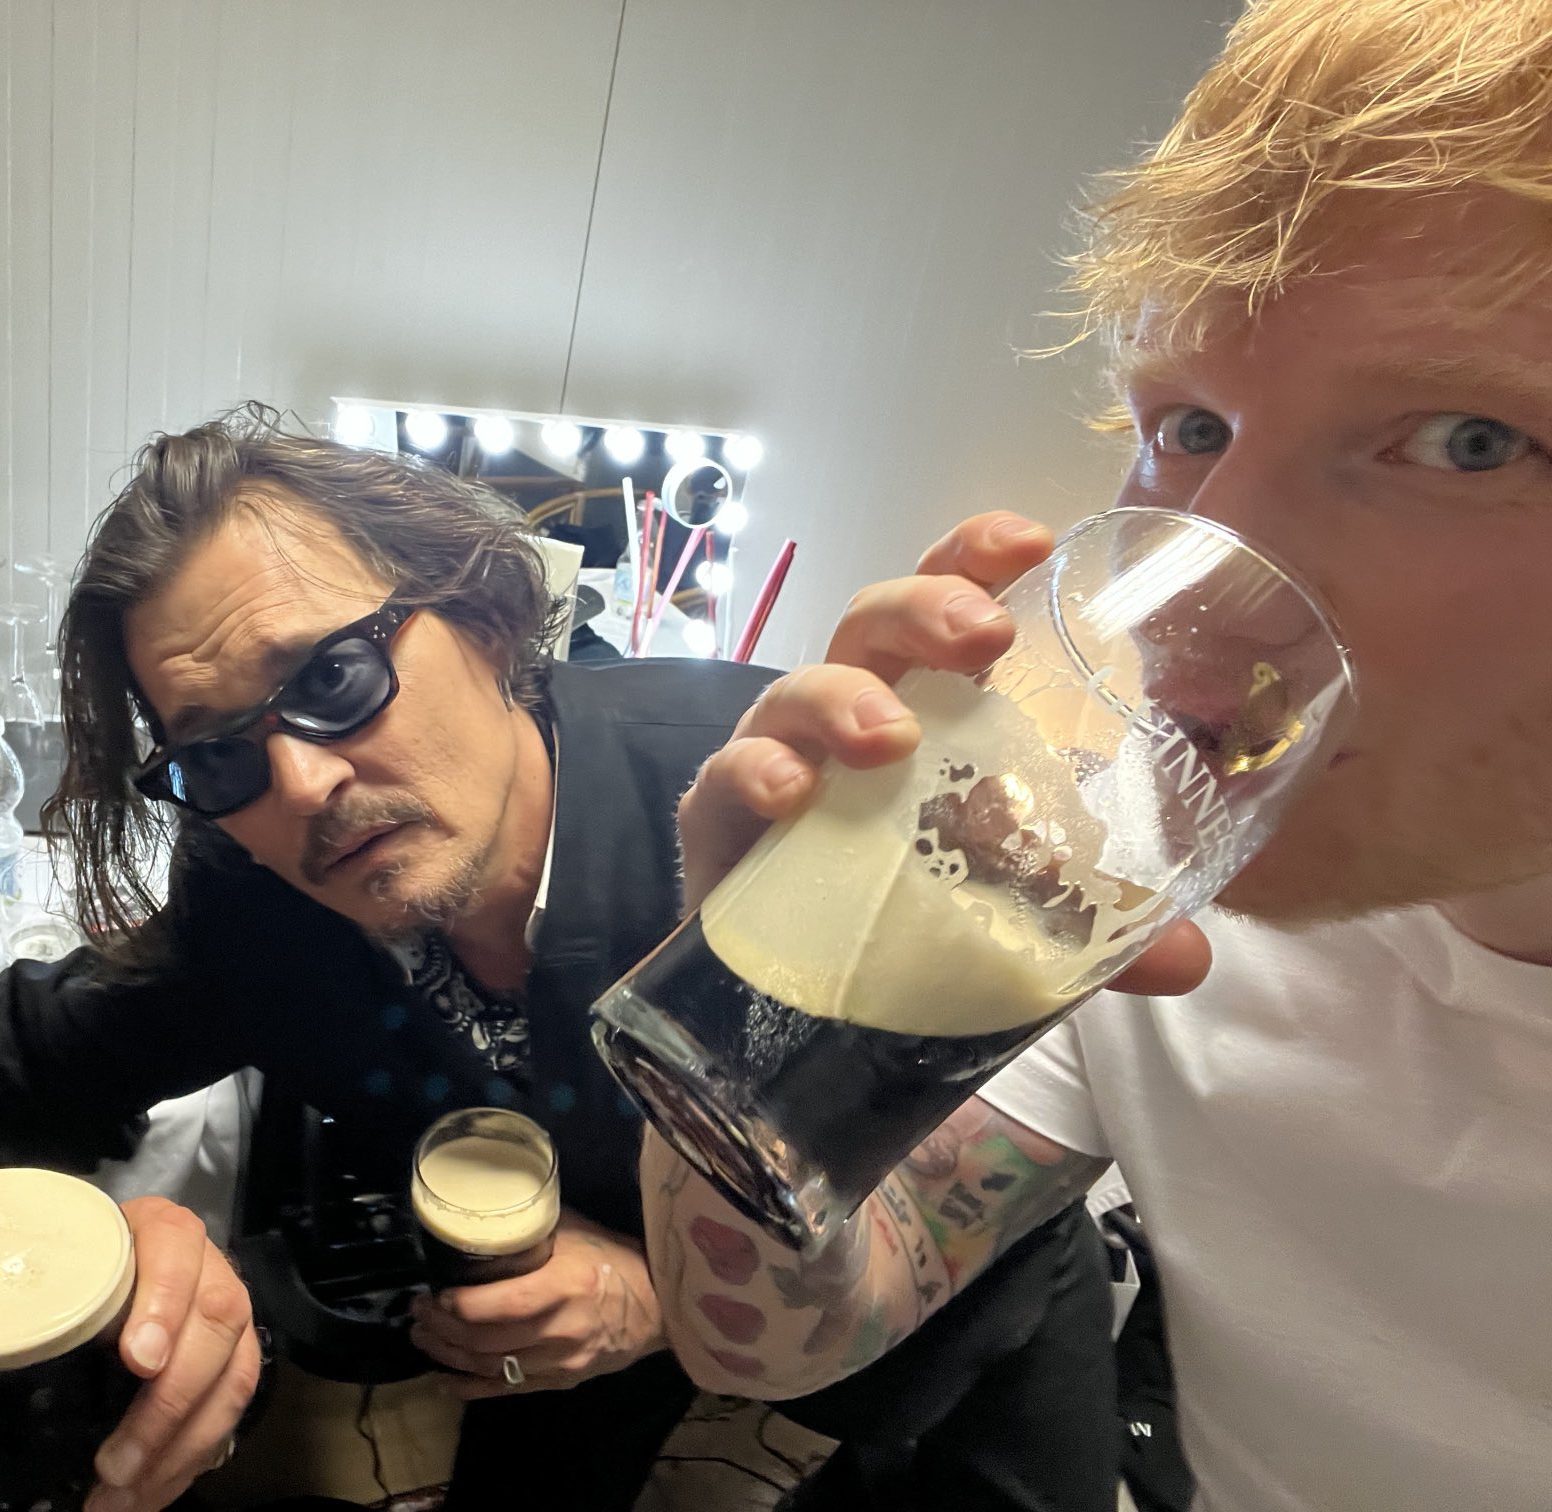 People Call For Ed Sheeran To Be ‘Canceled’ After He’s Pictured Drinking With Johnny Depp